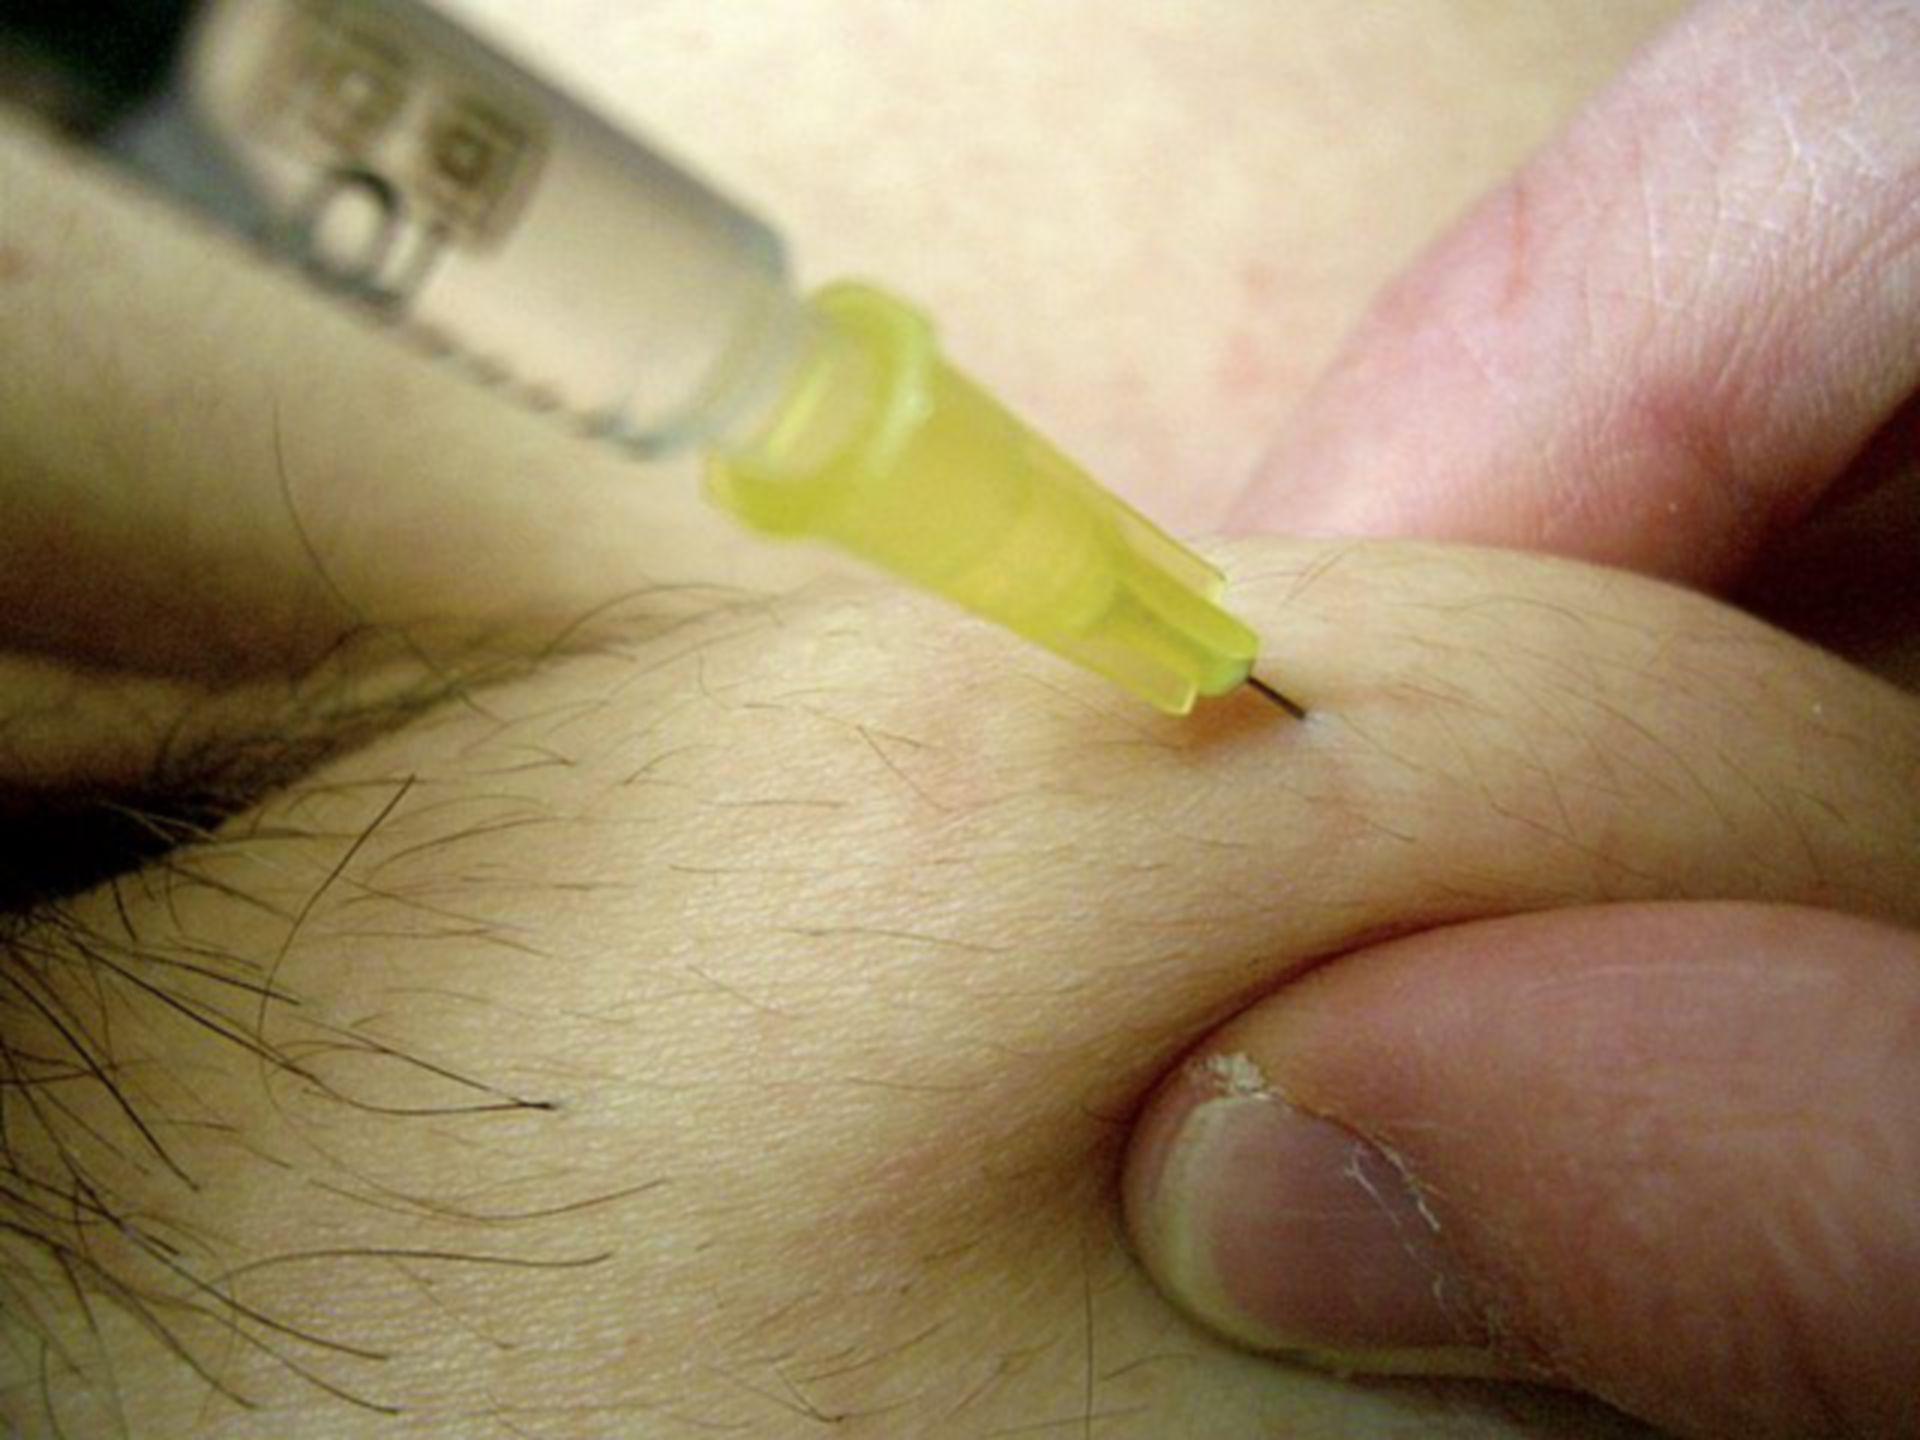 subcutaneous injection